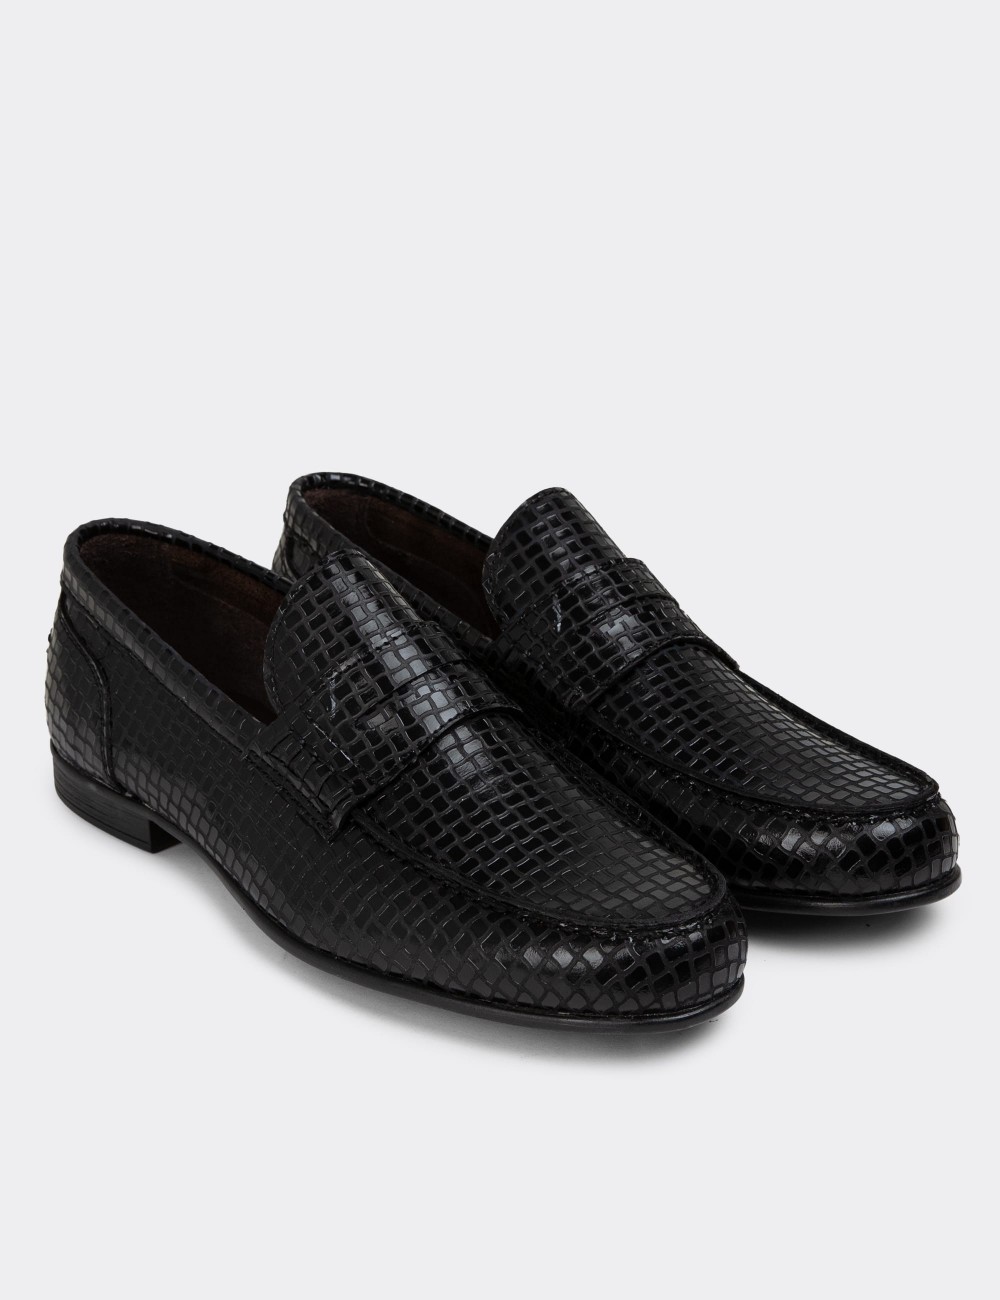 Black Leather Loafers - 01978MSYHC07